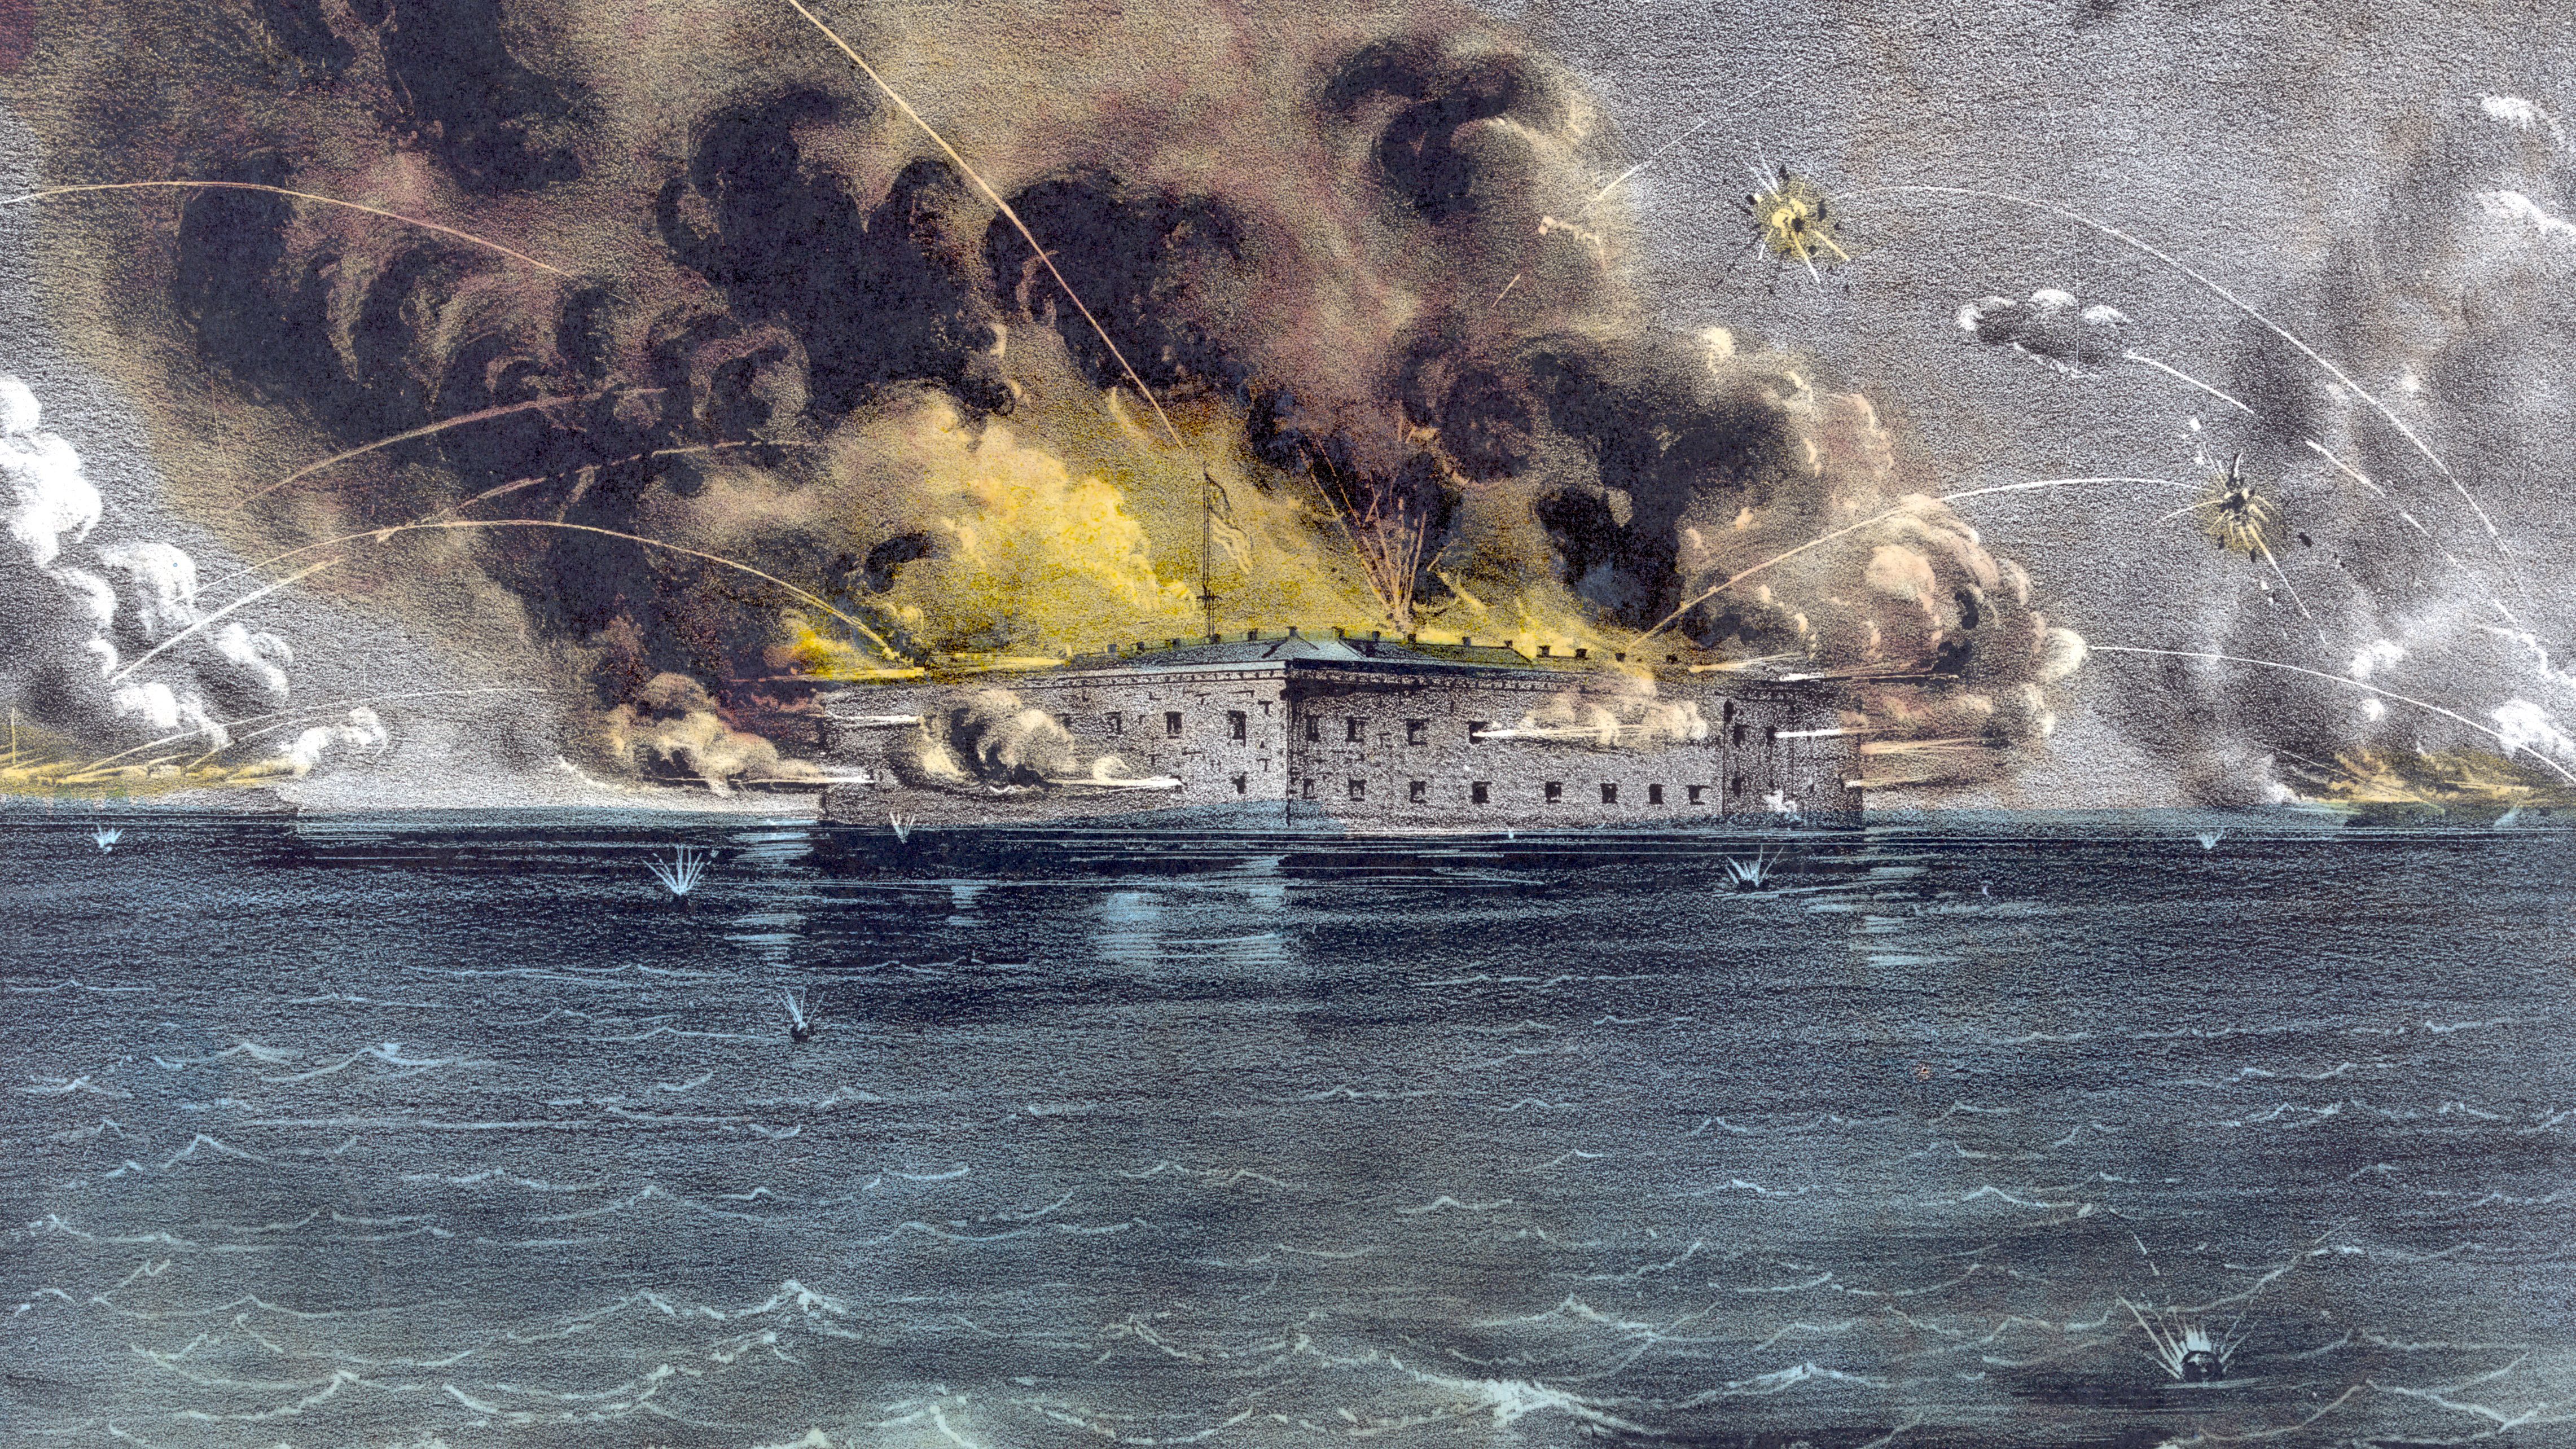 Attack on Fort Sumter Began the Civil War in 1861